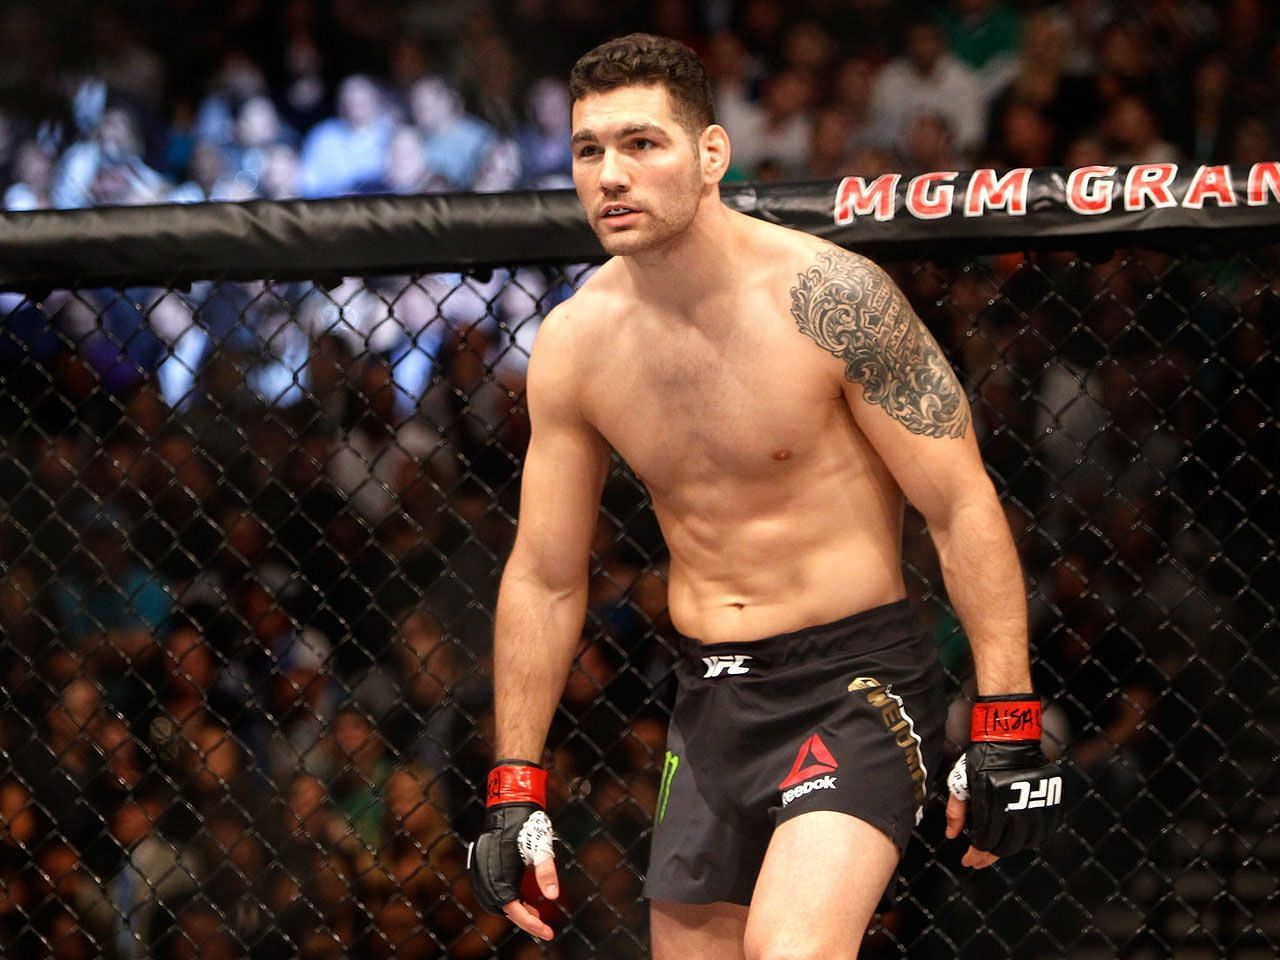 Chris Weidman suffered a quick downfall after losing his middleweight crown